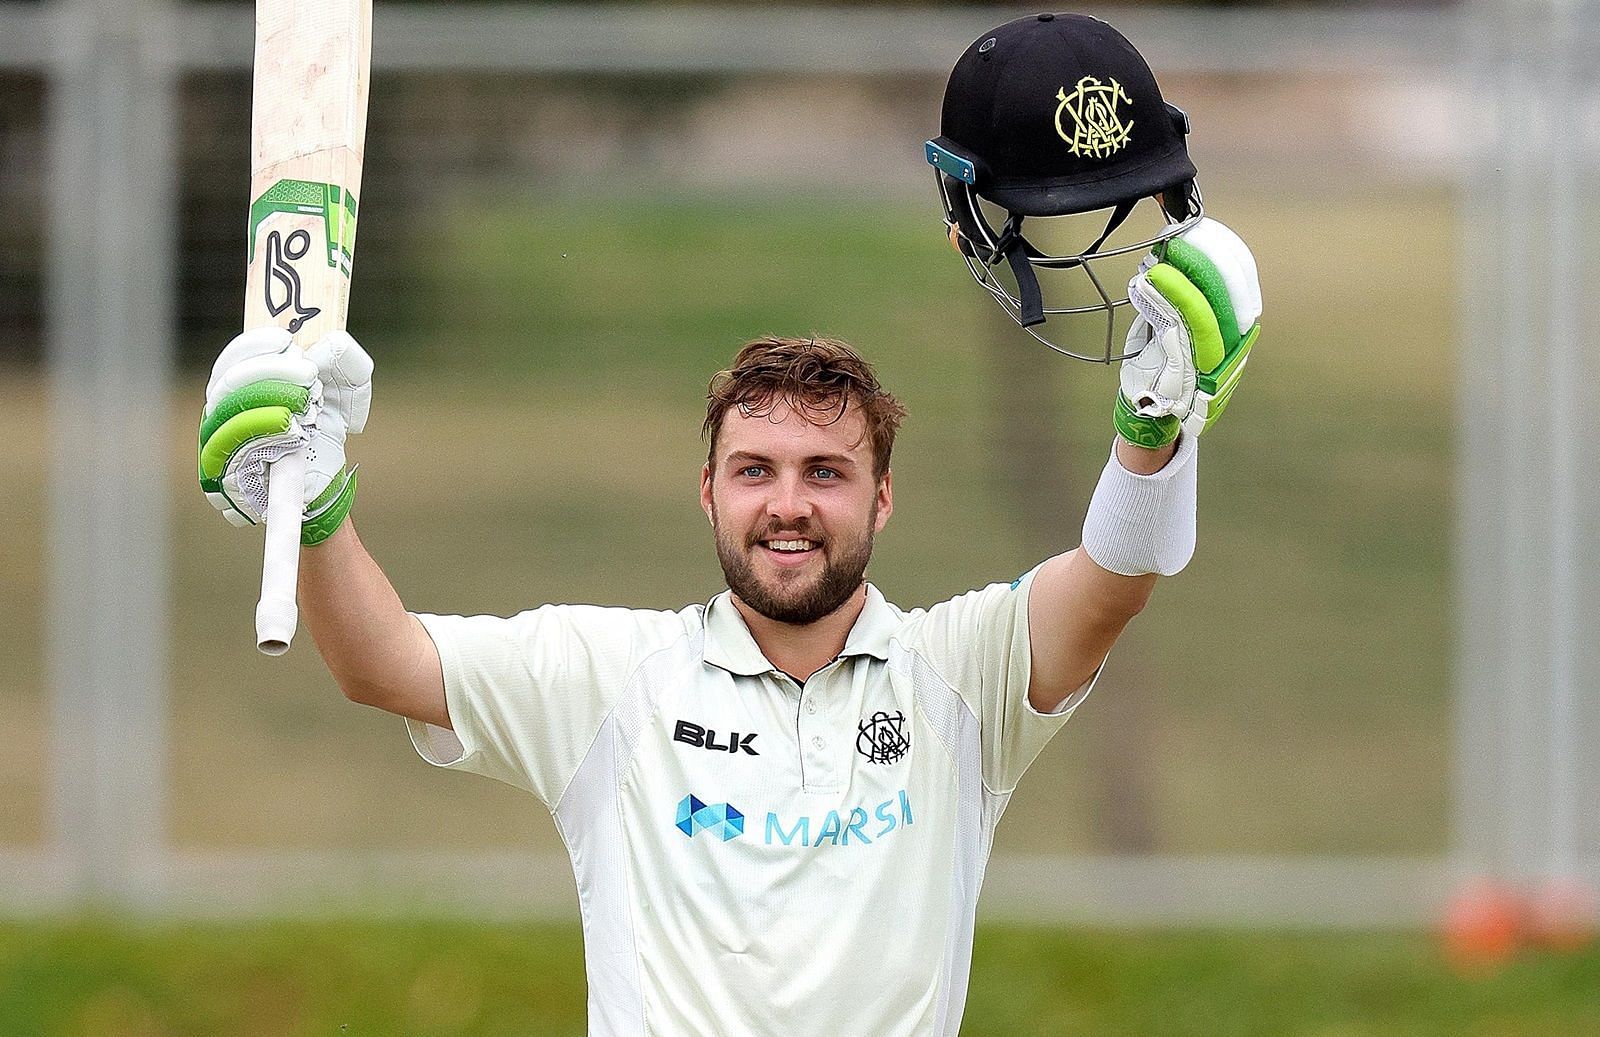 Josh Inglis has caught the eye of a few legends with his batting performances recently.